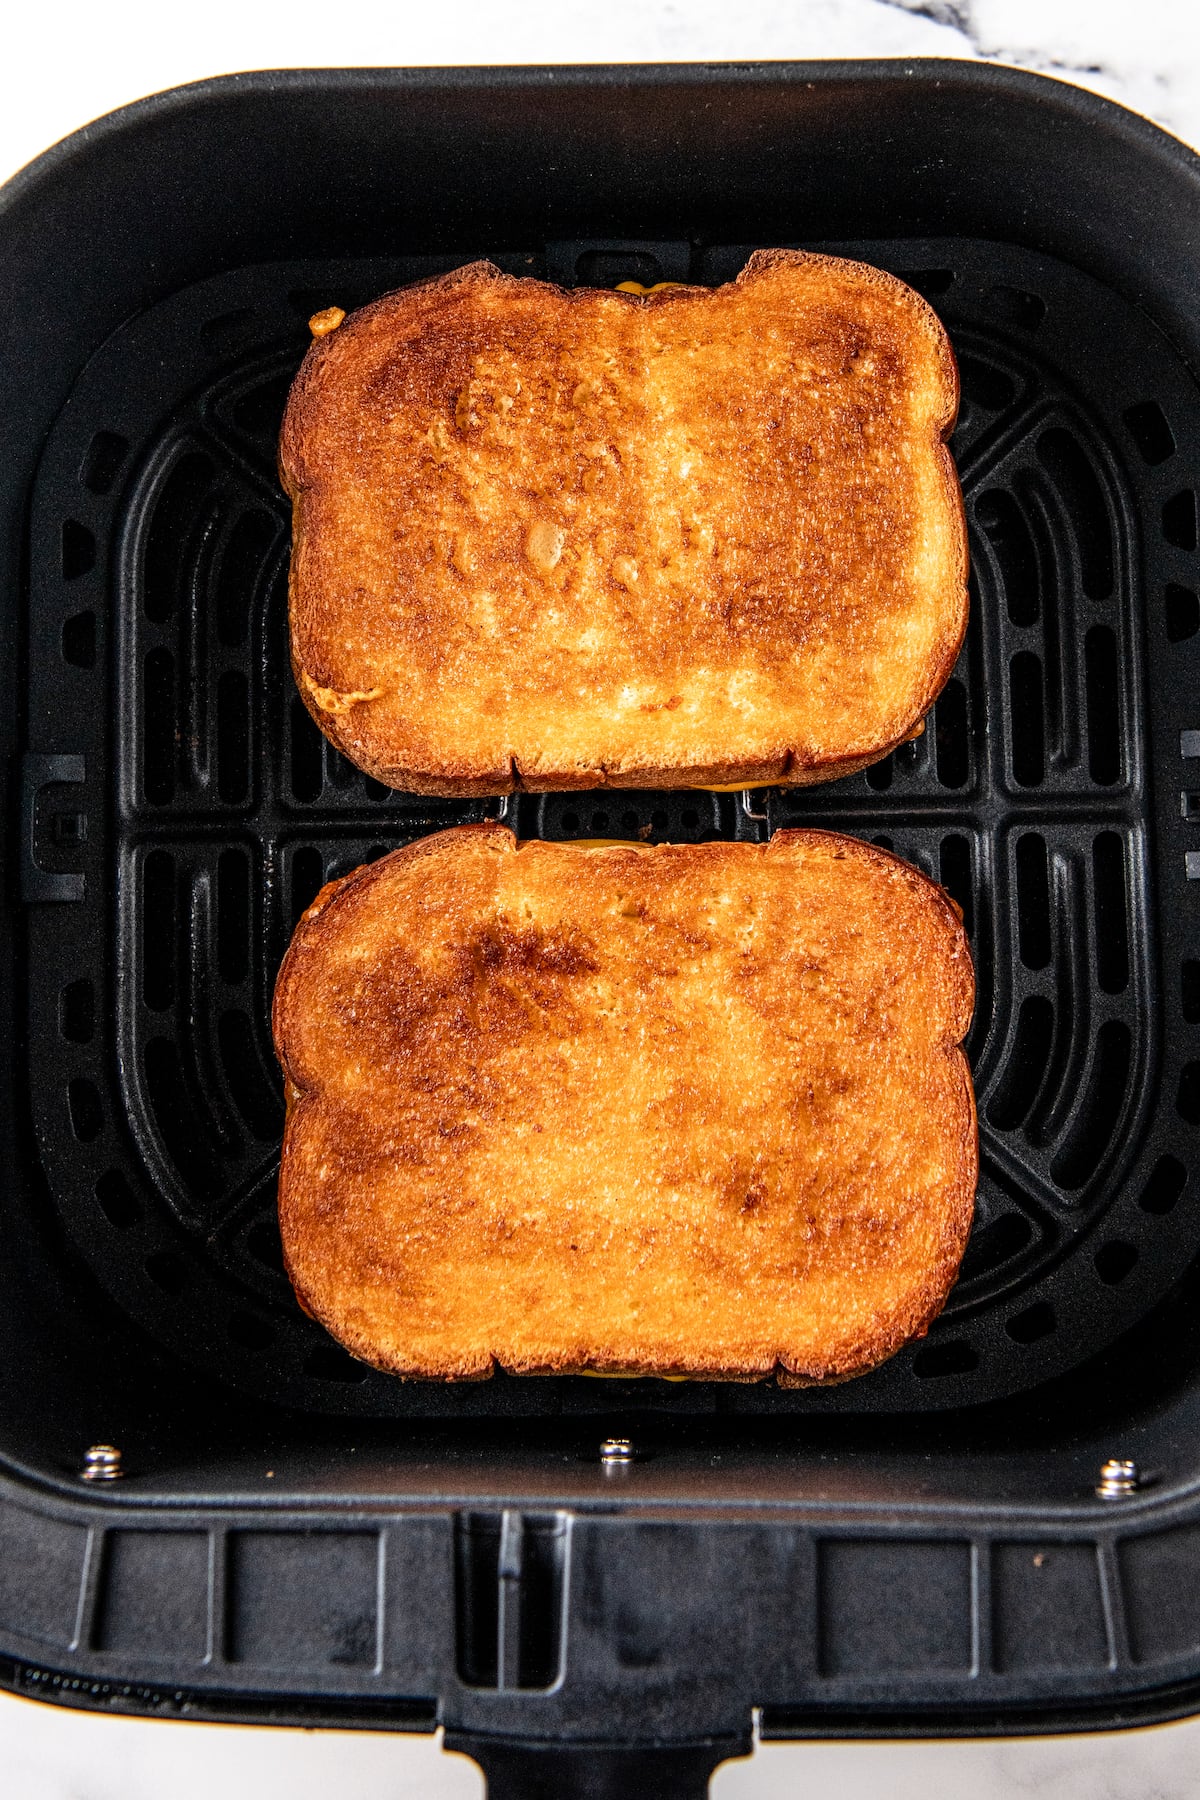 two toasted sandwiches in an air fryer